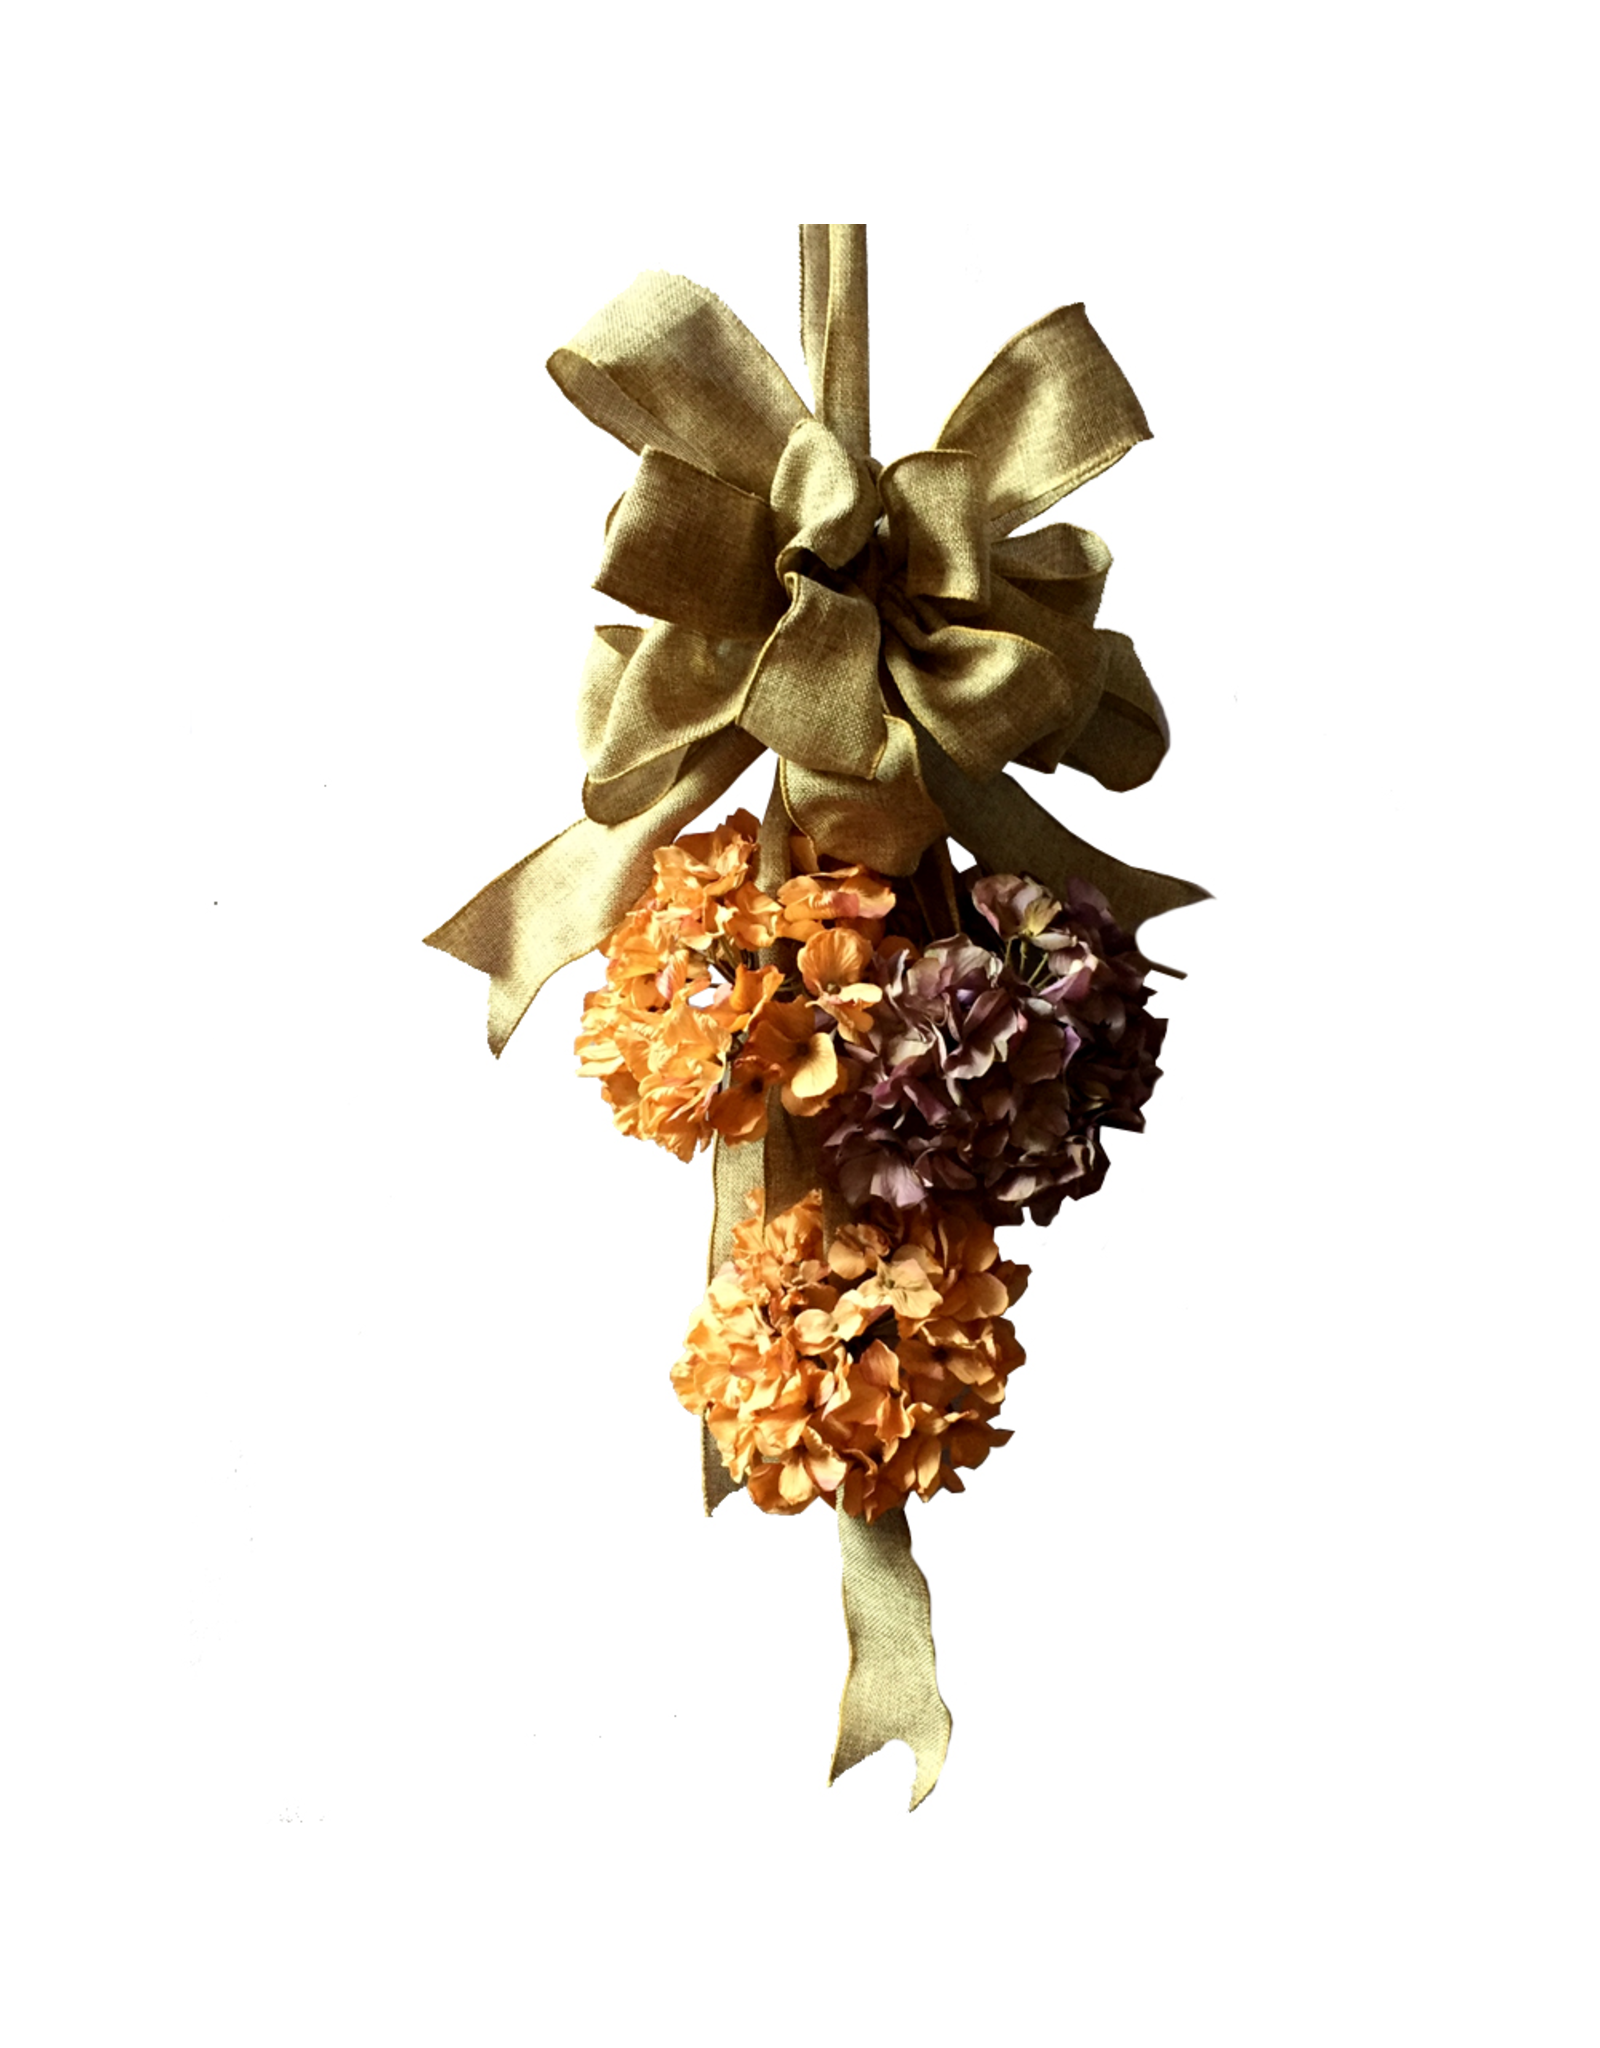 DIGS-N-GIFTS Burlap Bow w Fall Floral Door Hanger Wall Decor